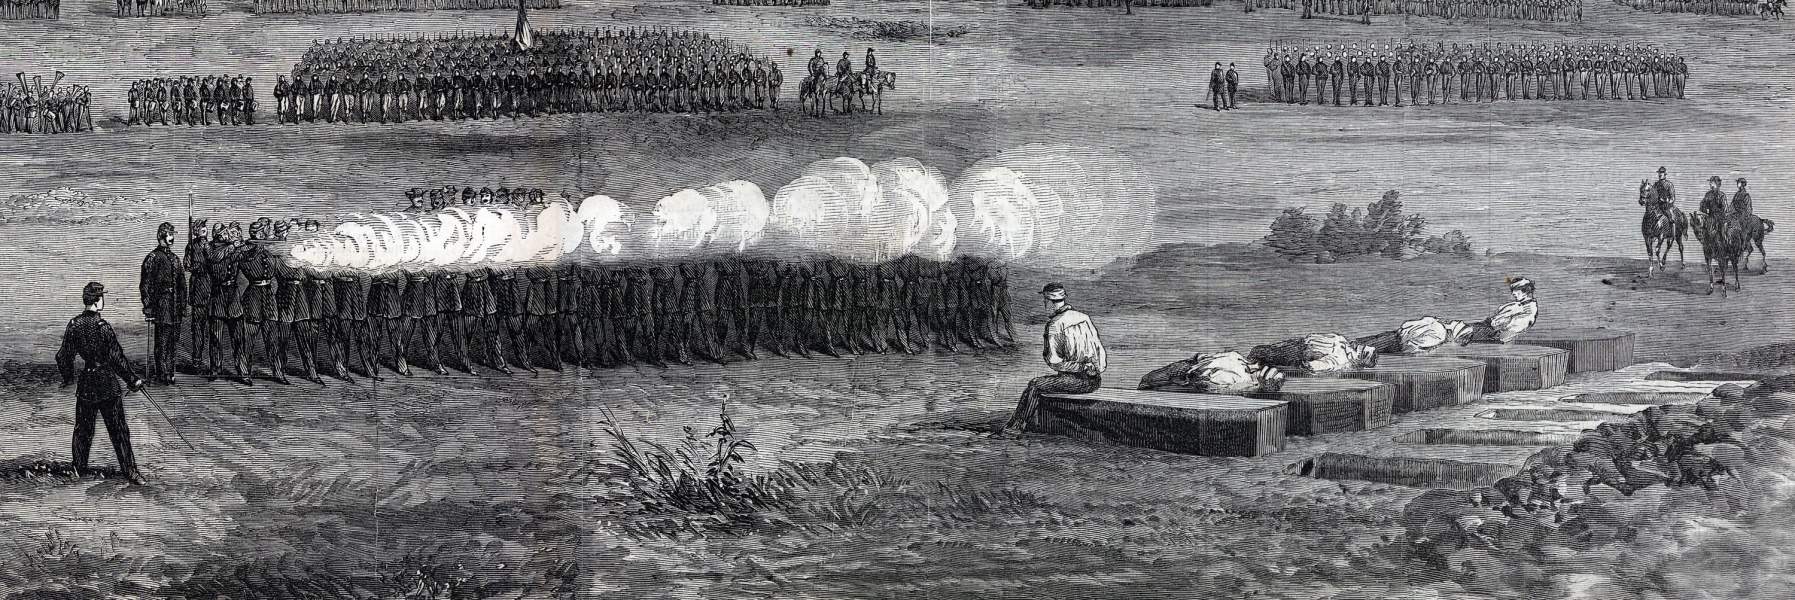 Execution of five 118th Pennsylvania deserters, Virginia, August 29, 1863, artist's impression, zoomable image, detail